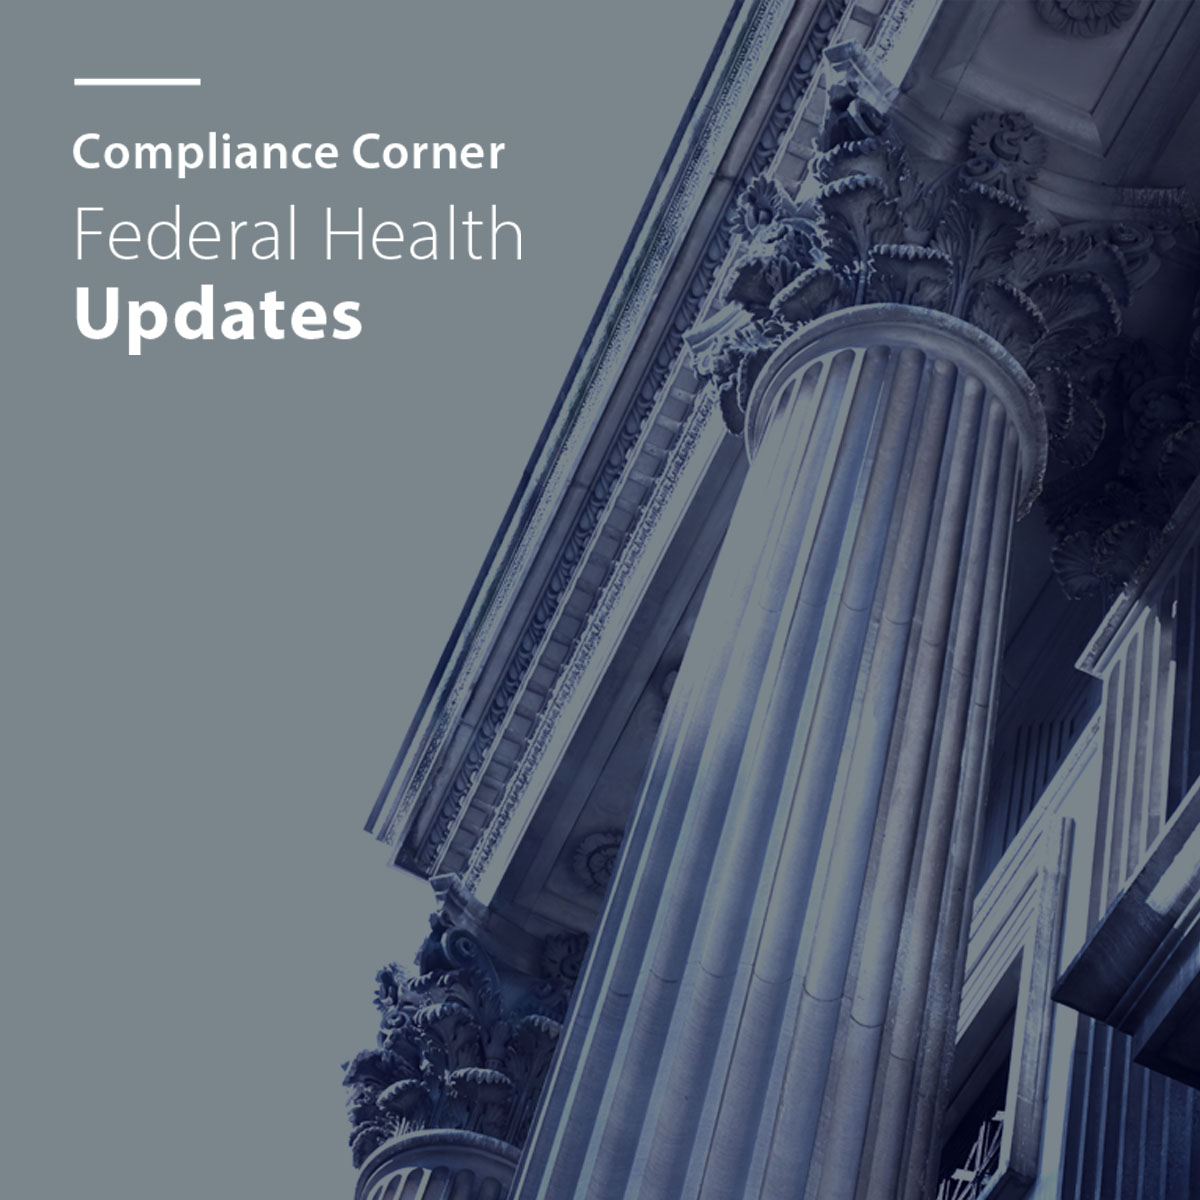 ⚖️ Final Rules Issued on Fixed Indemnity Coverage and Short-Term Limited-Duration Insurance Includes New Group Plan Notice Requirement: nfp.com/insights/new-g… #NFP #Benefits #Compliance